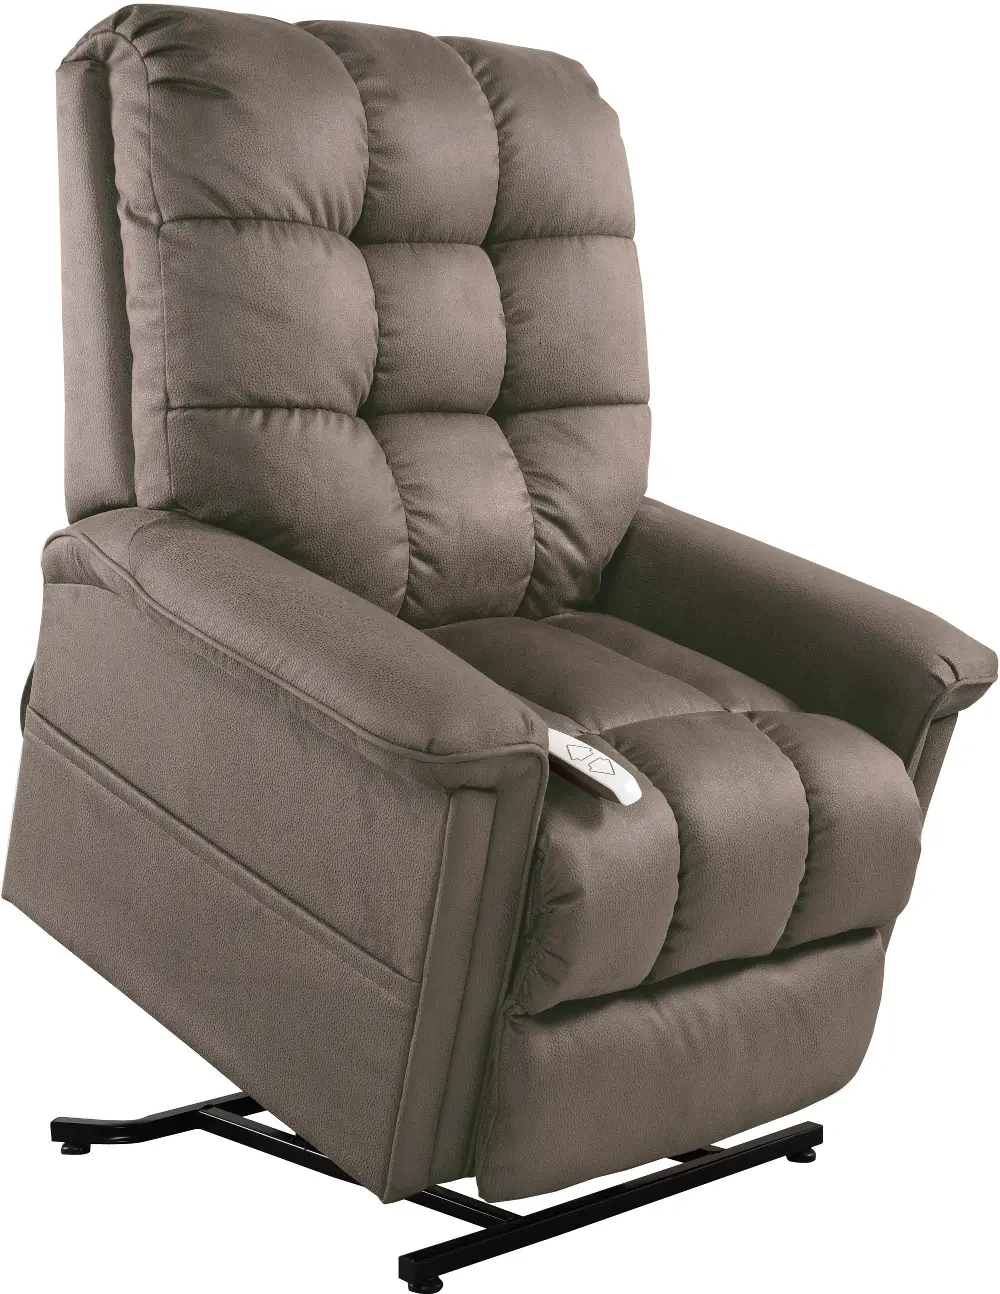 Stone Power Recliner With Lift Option-1